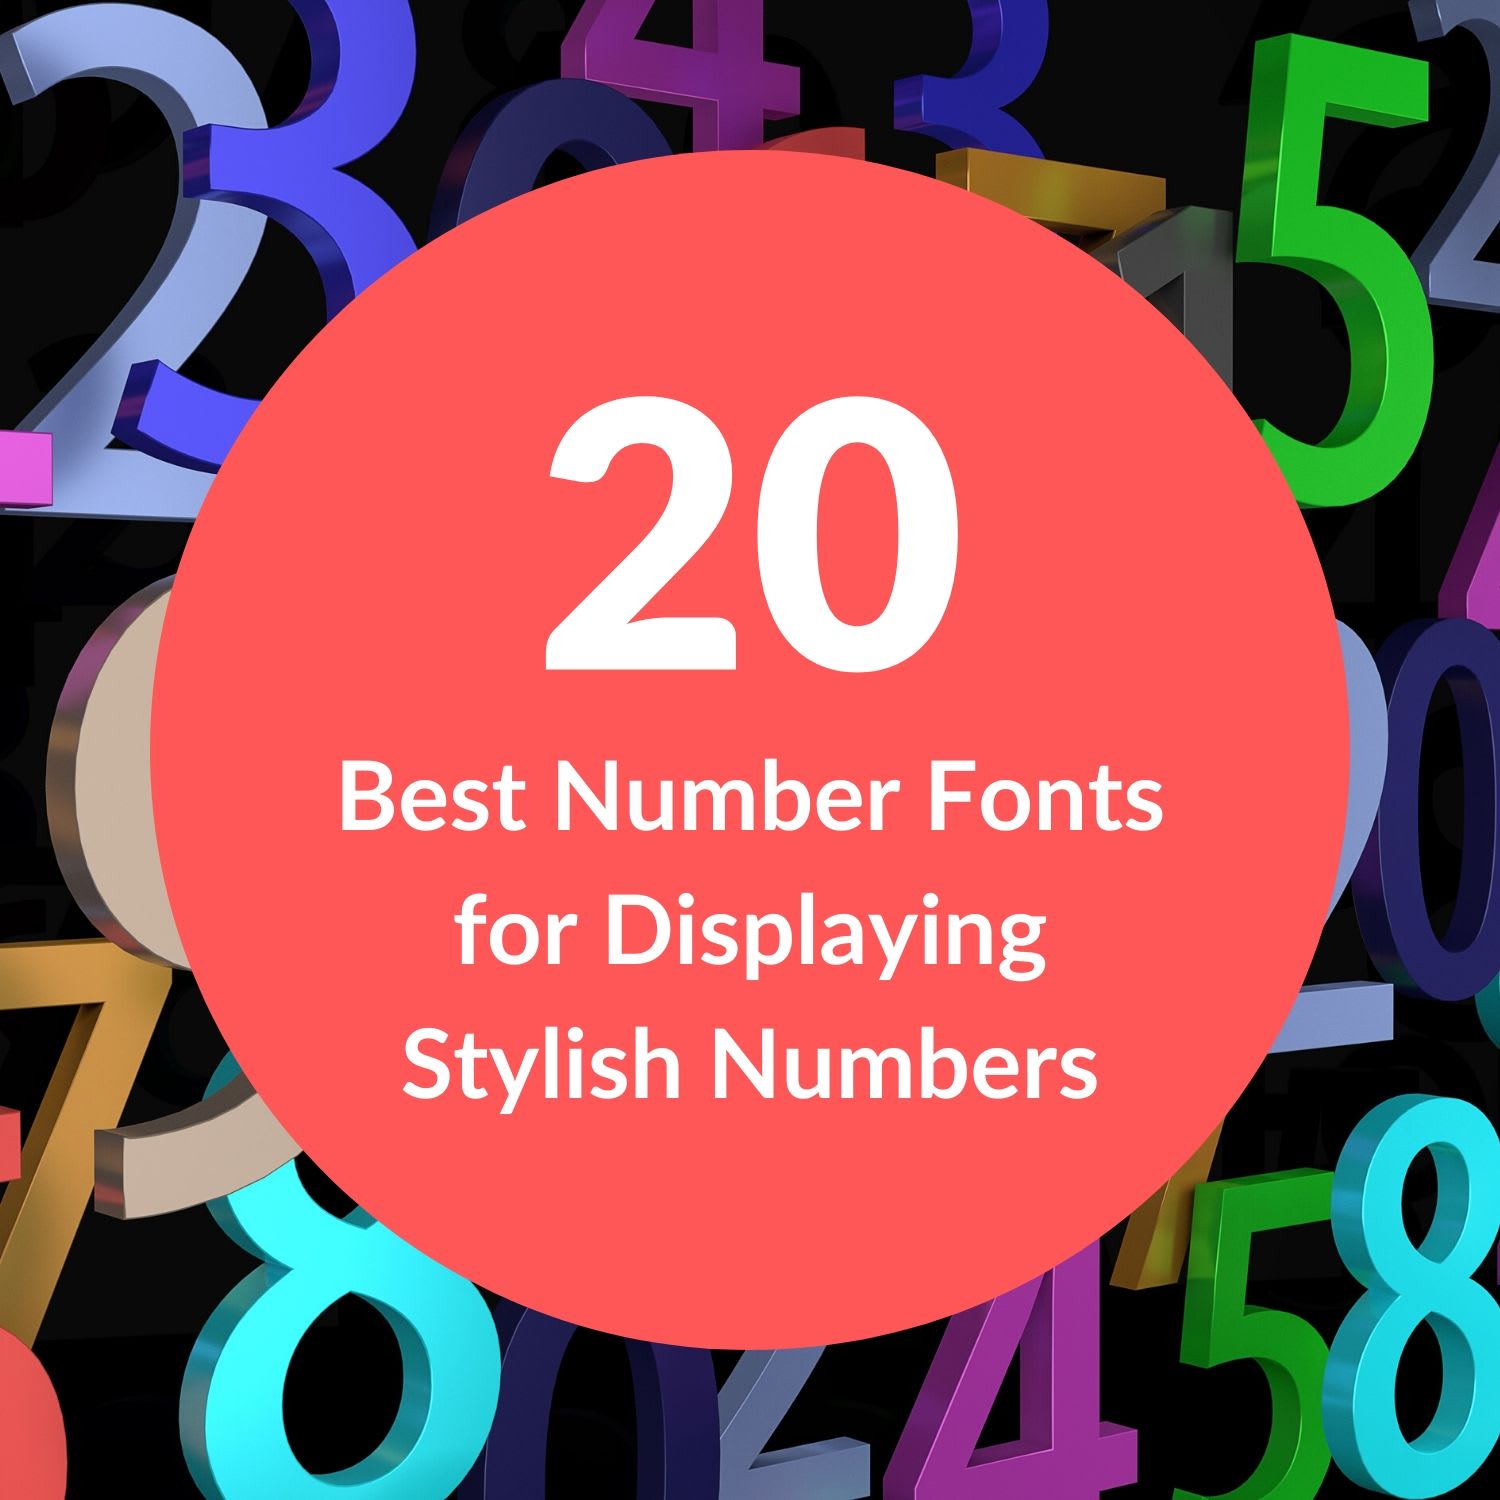 20 Best Number Fonts for Displaying Stylish Numbers